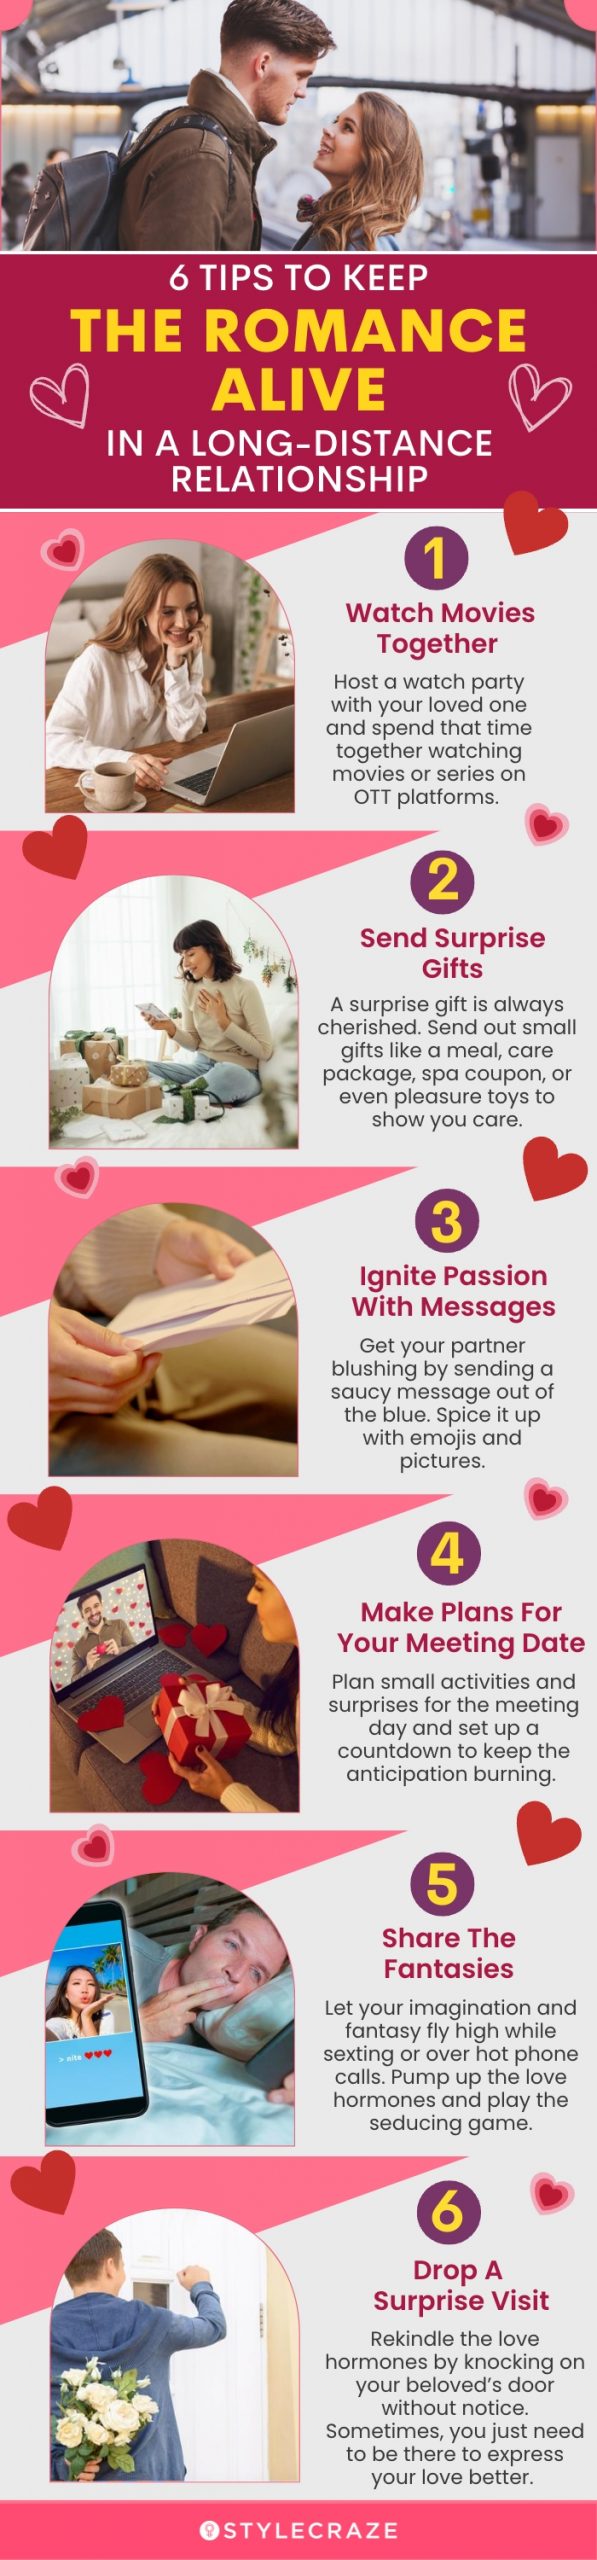 6 tips to keep romance alive in a long distance relationship (infographic)